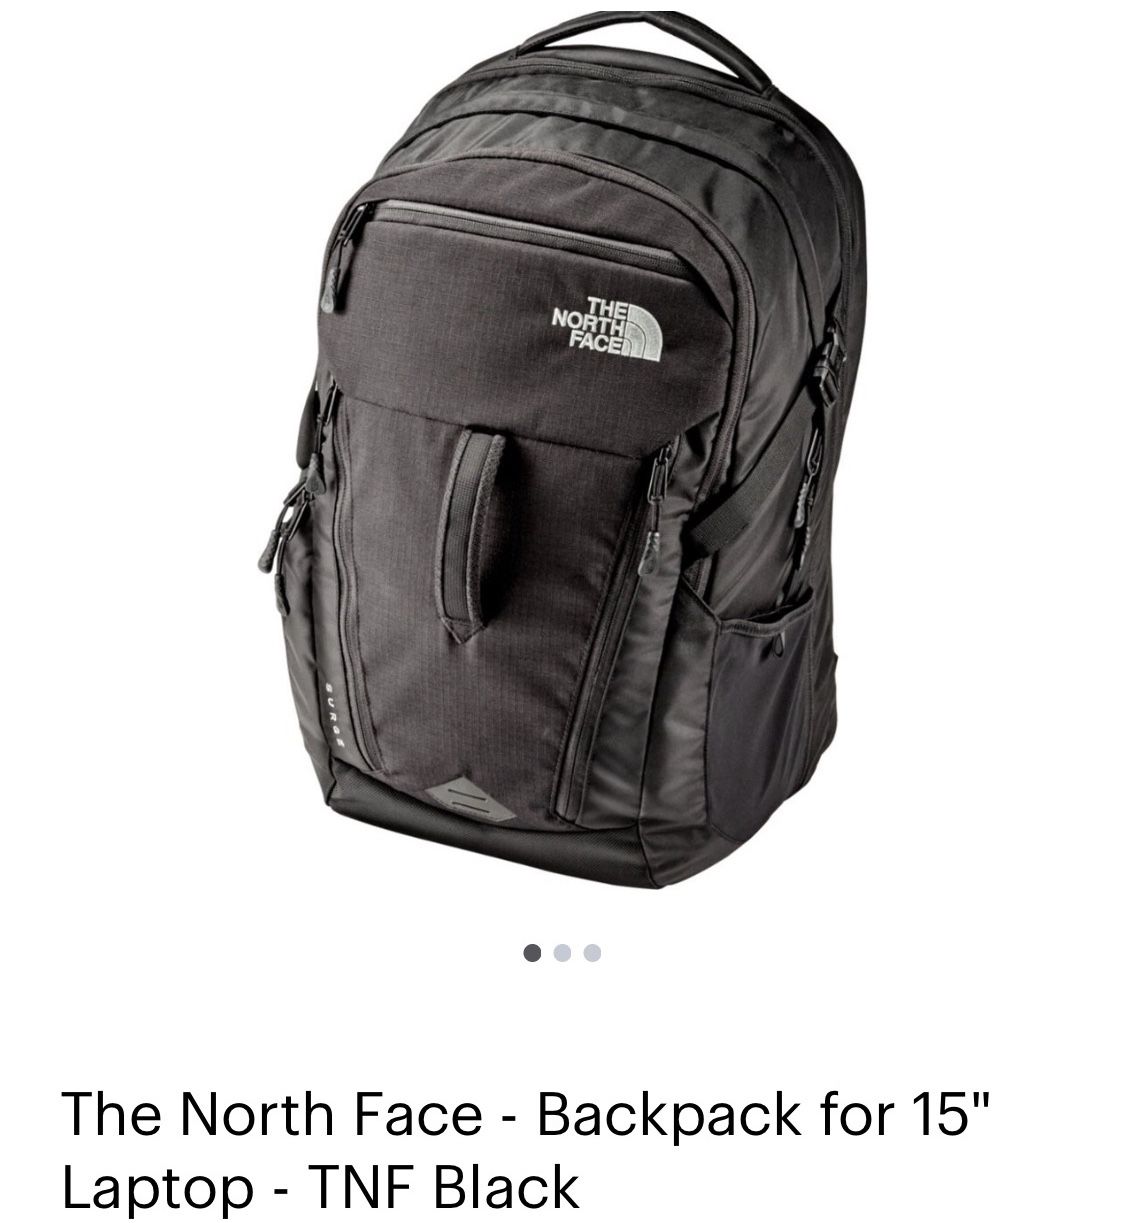 The North Face Backpack 15” - black